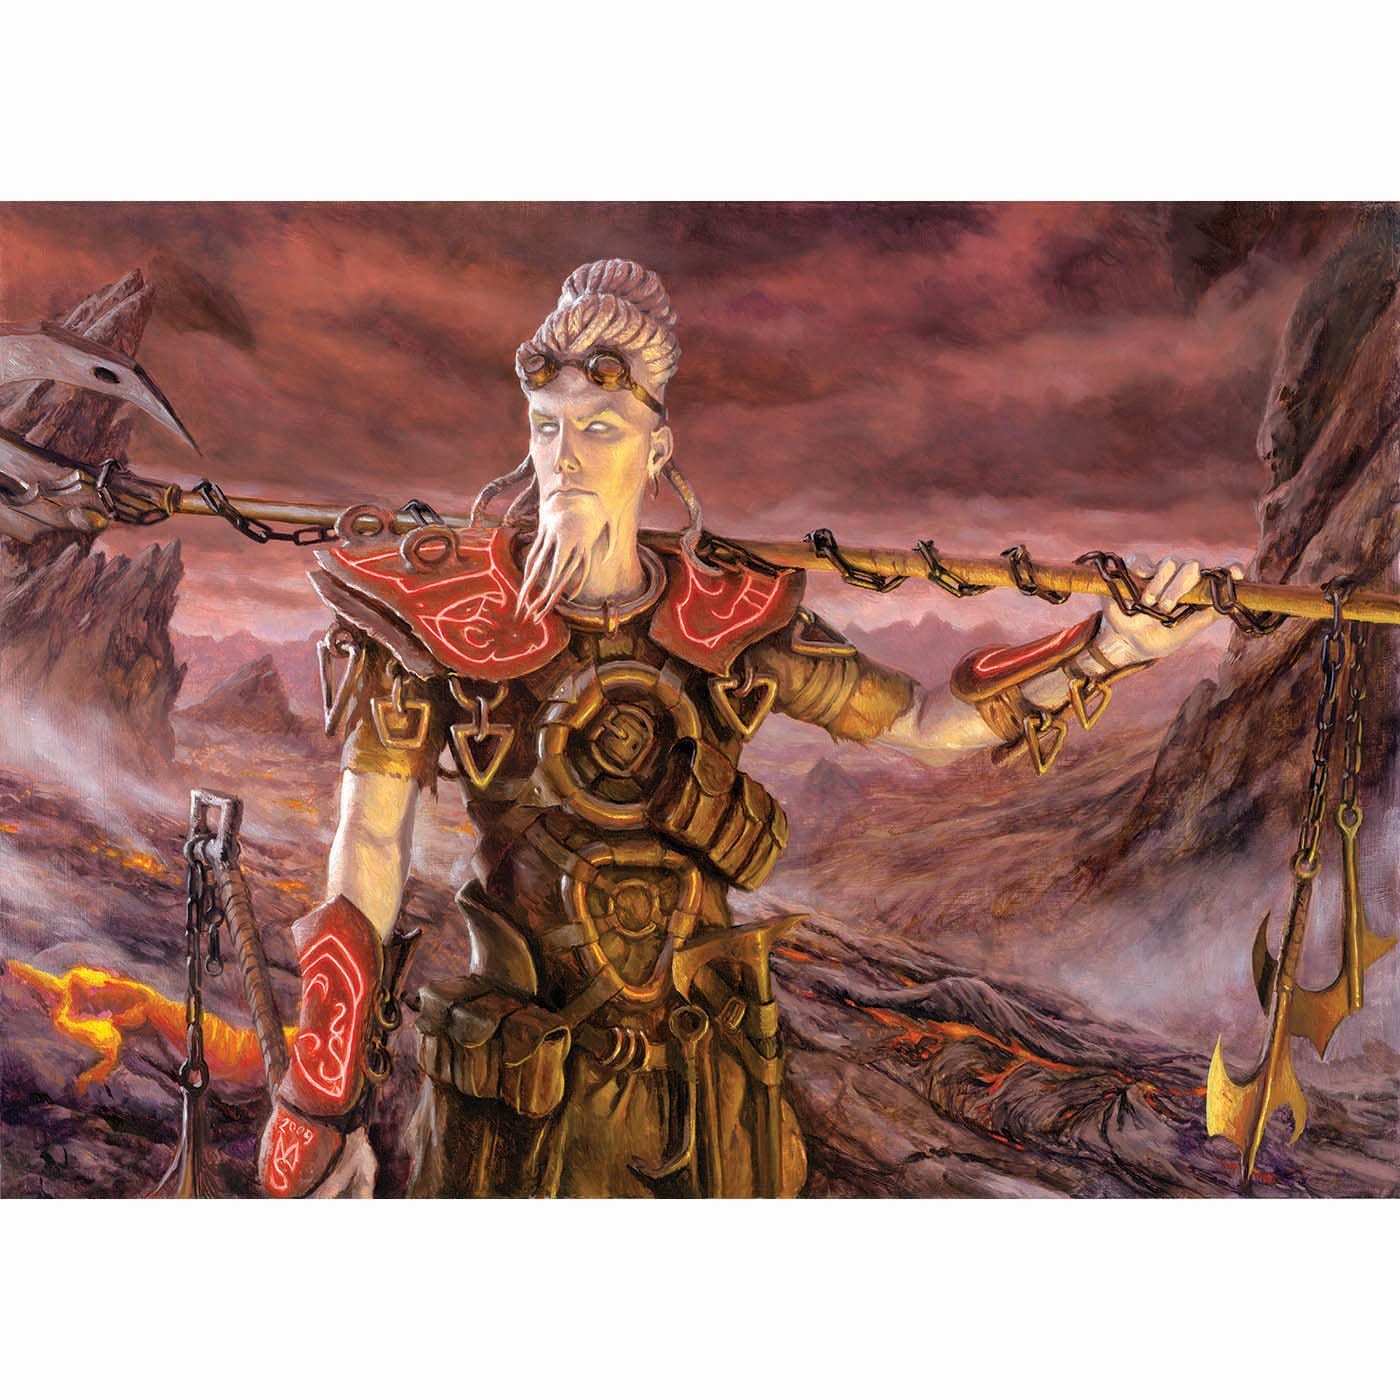 Kor Firewalker Print - Print - Original Magic Art - Accessories for Magic the Gathering and other card games